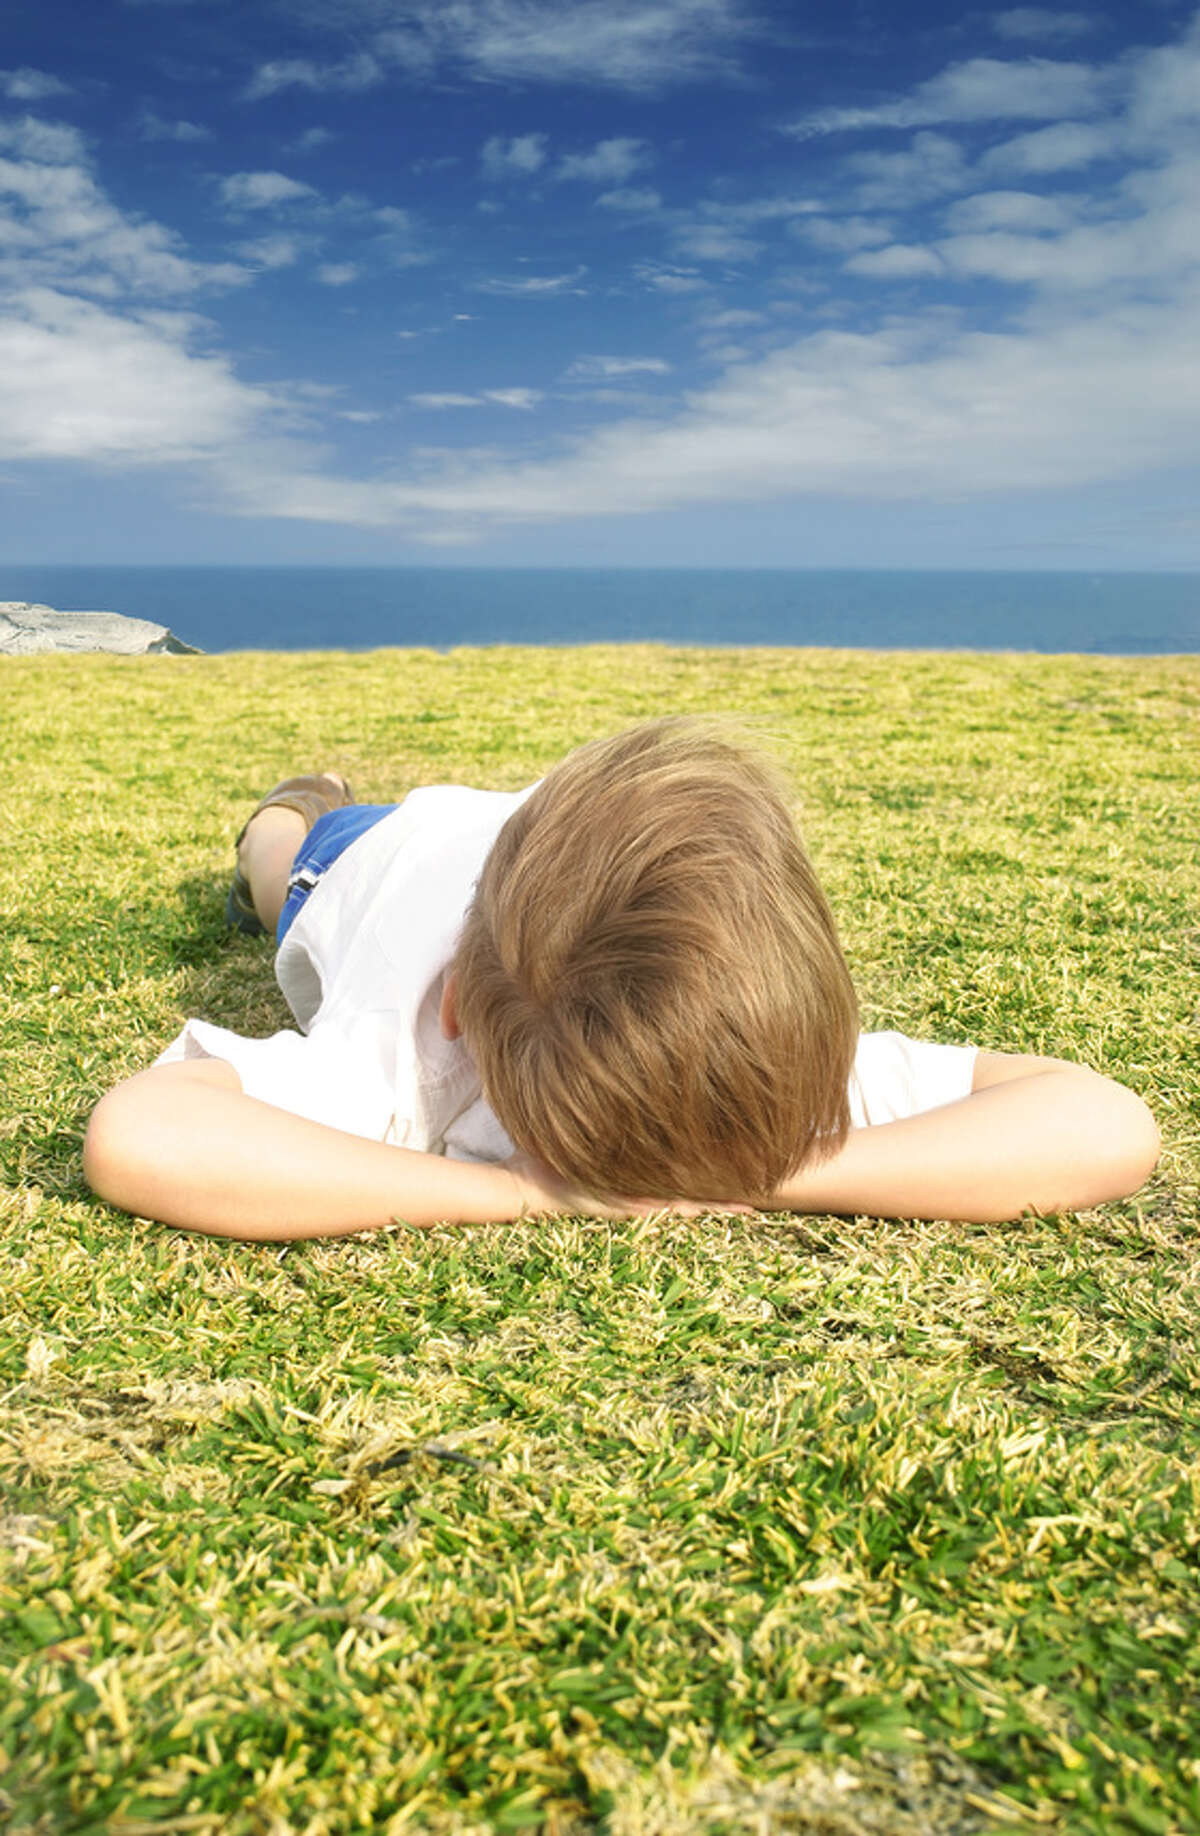 Daydreaming may be a sign that your child isn't getting the stimulation needed to stay involved in learning.